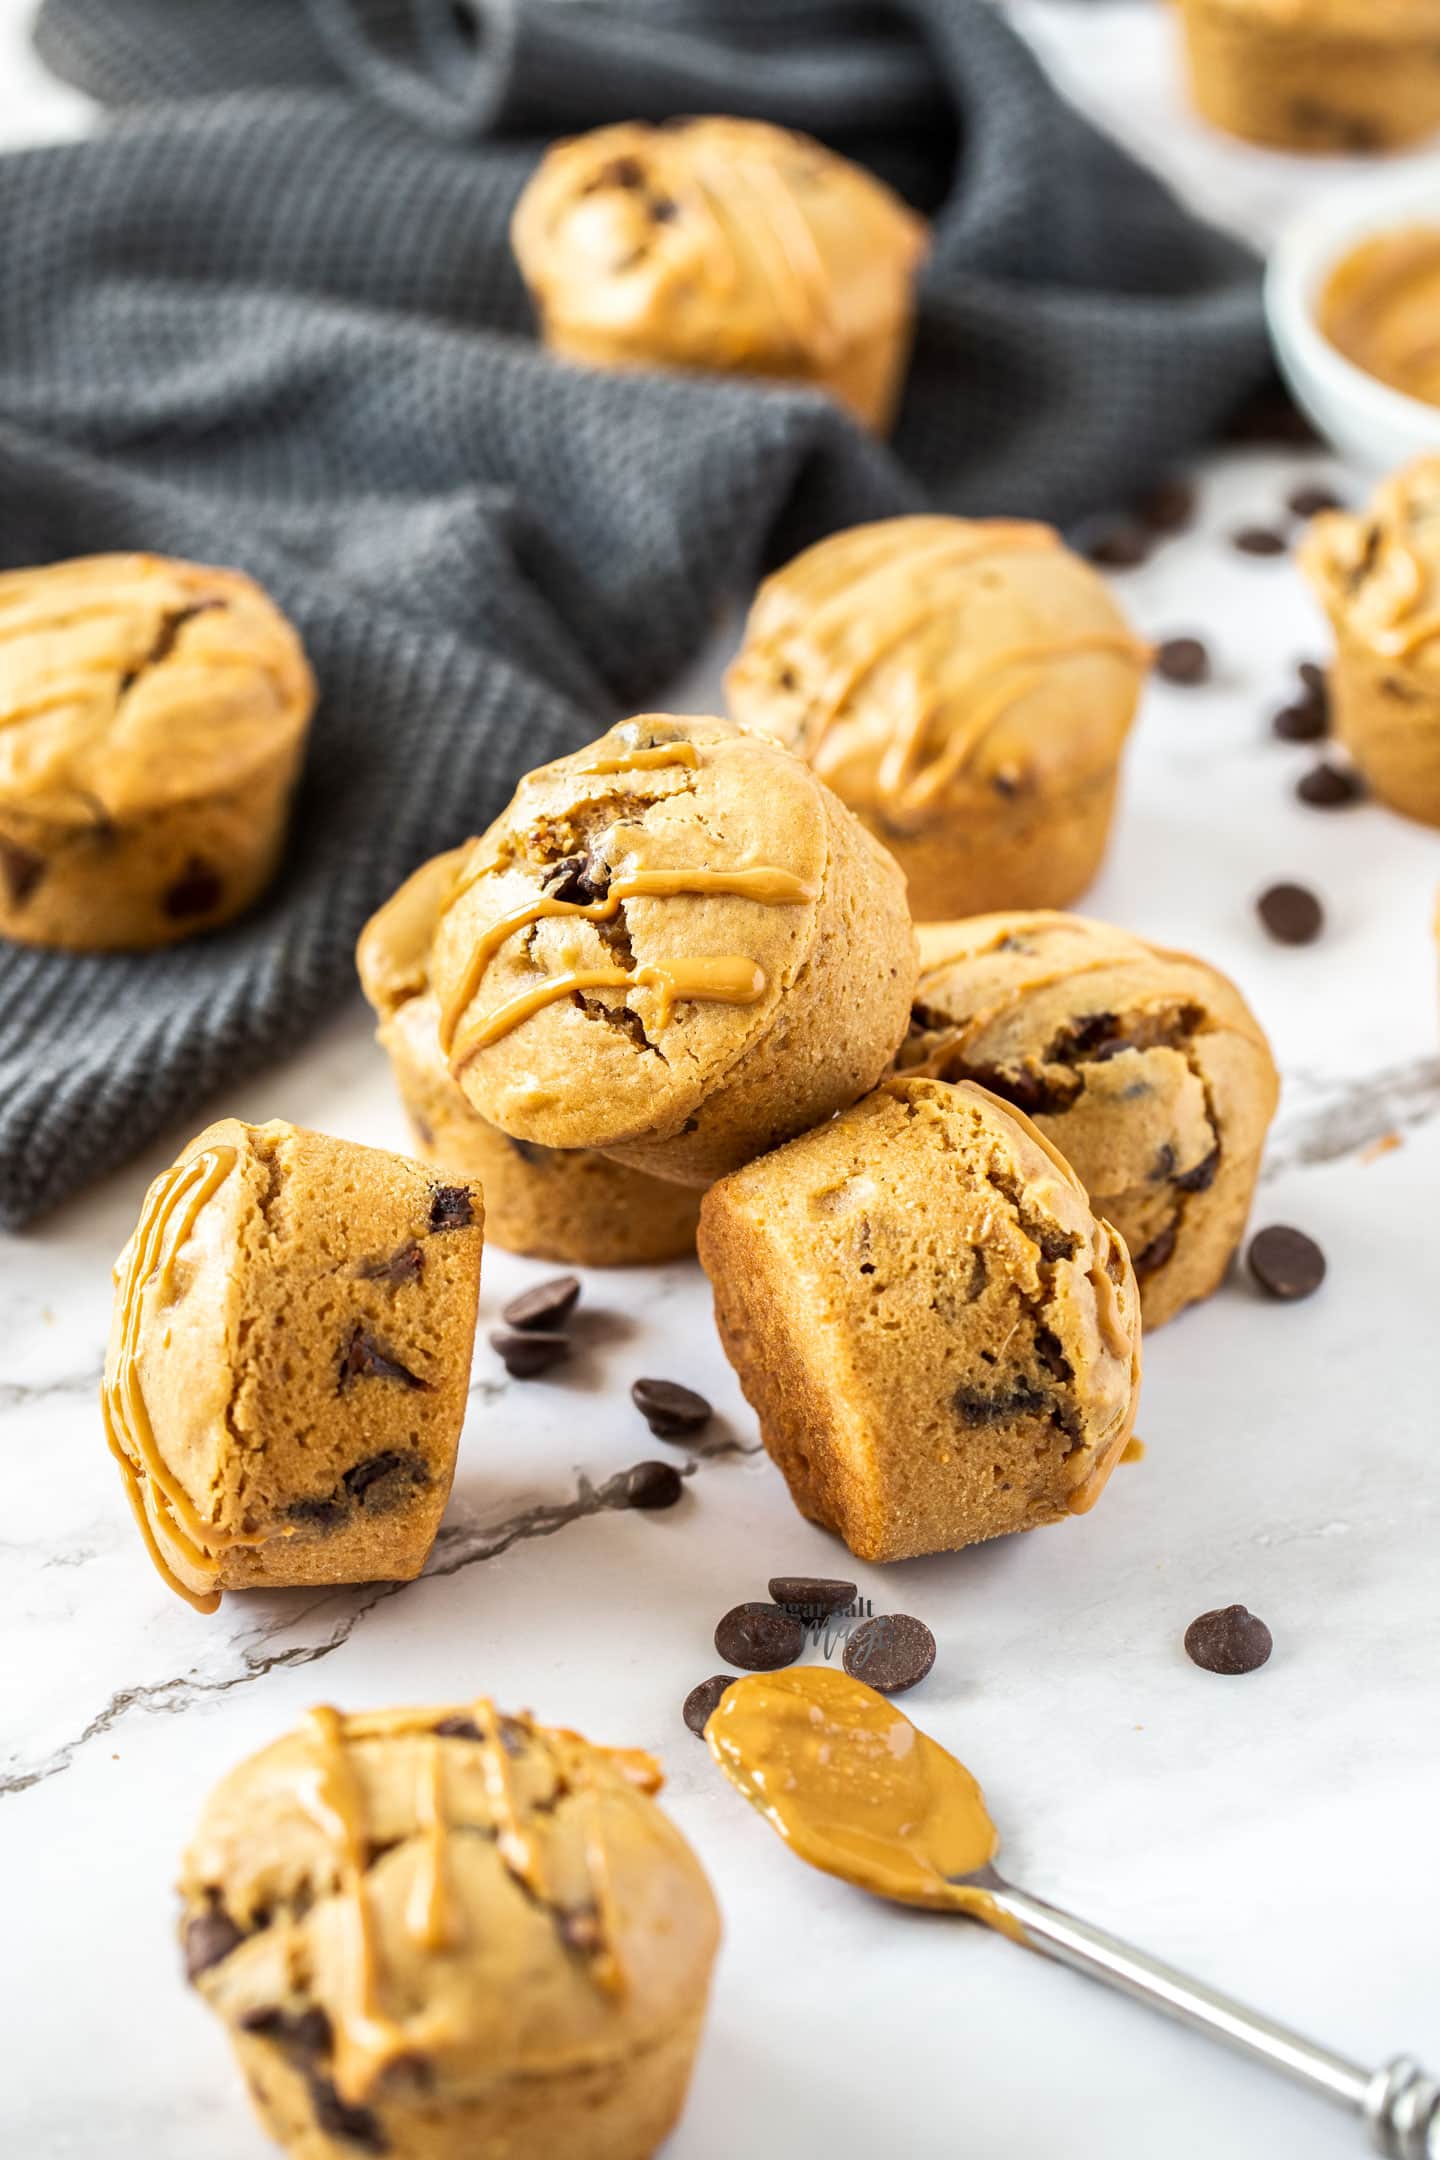 muffins stacked together with chocolate chips and peanut butter strewn around